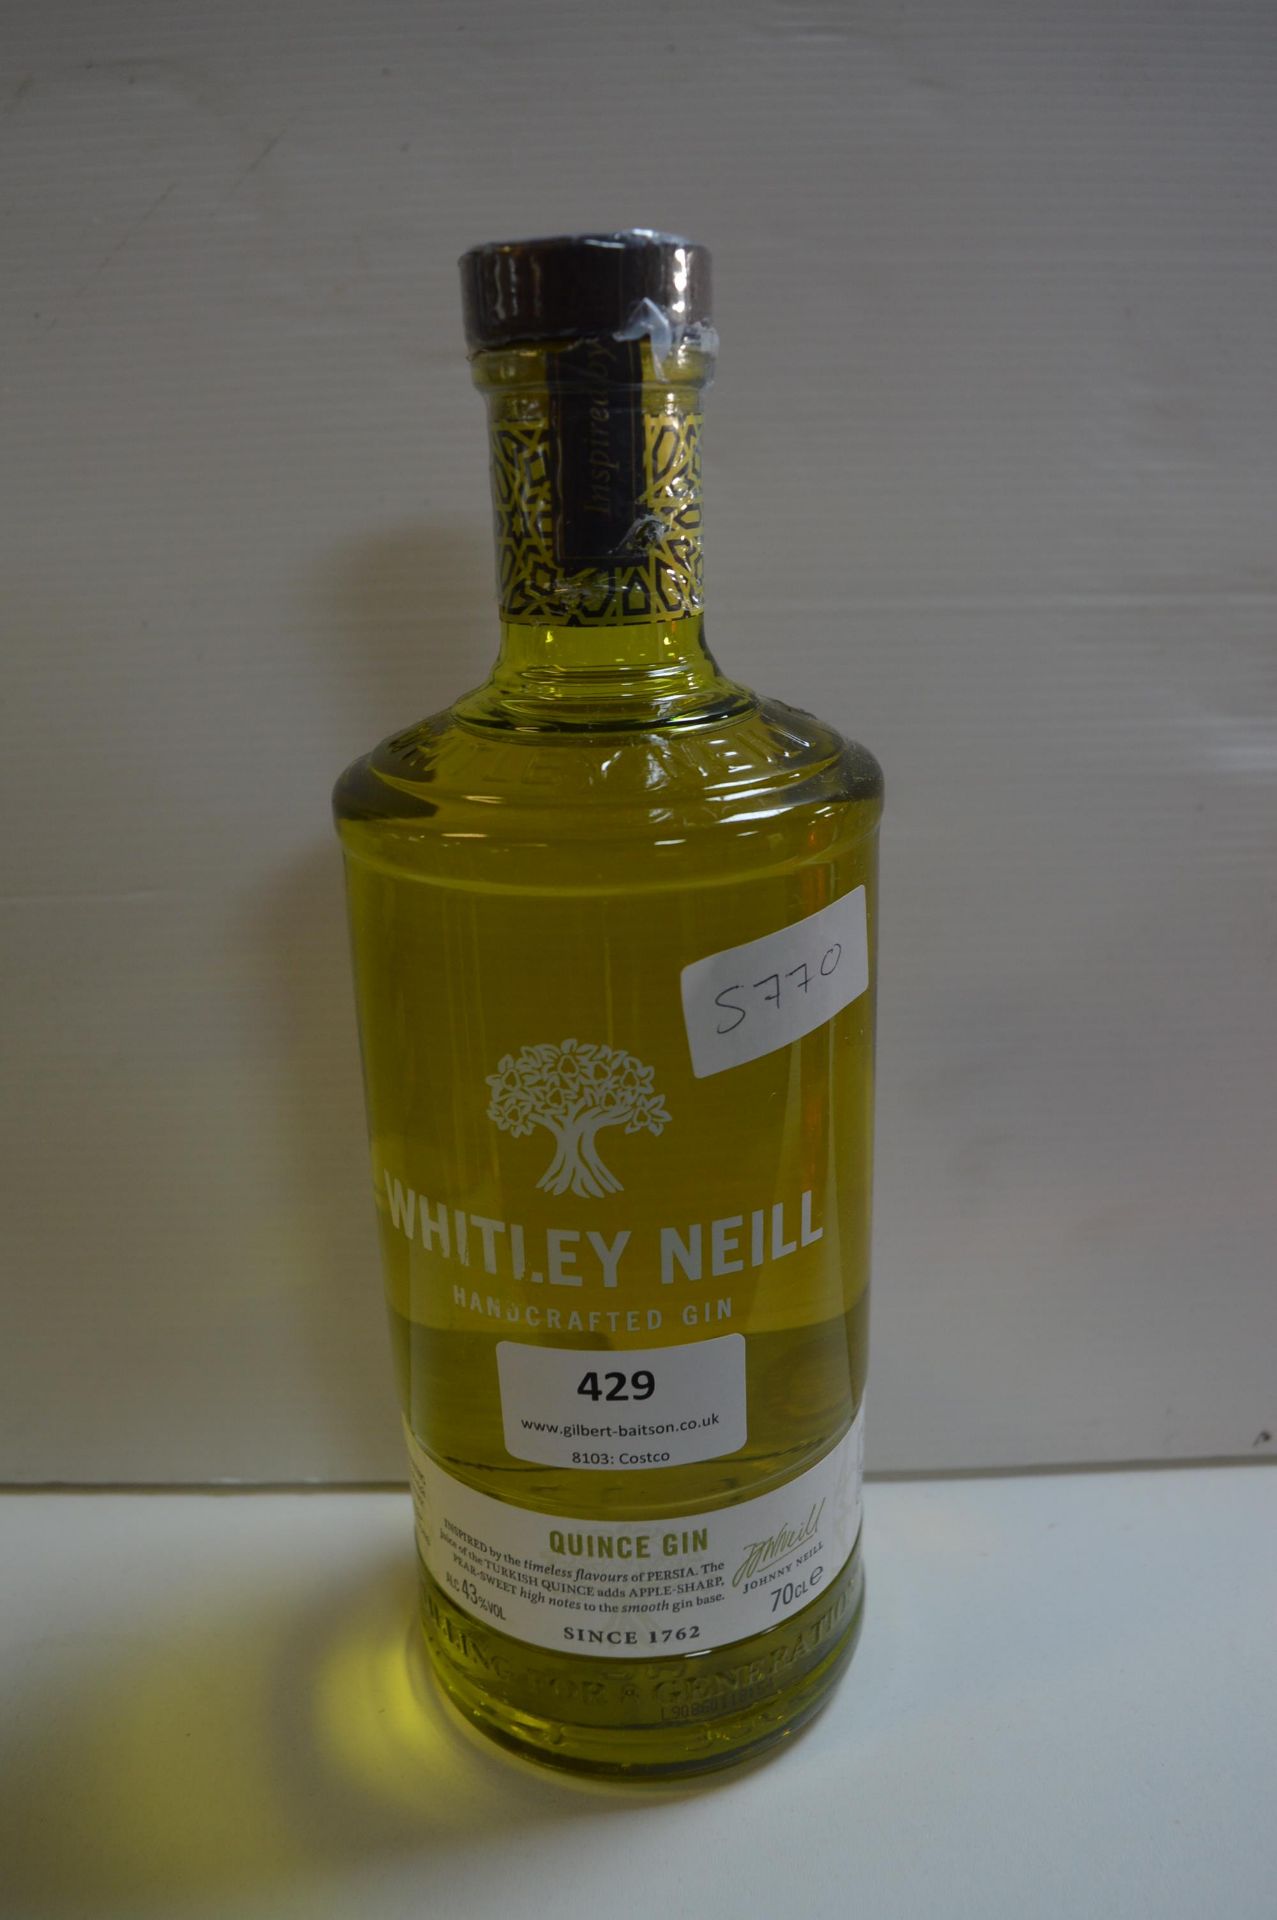 Bottle of Whitley Neill Quince Gin